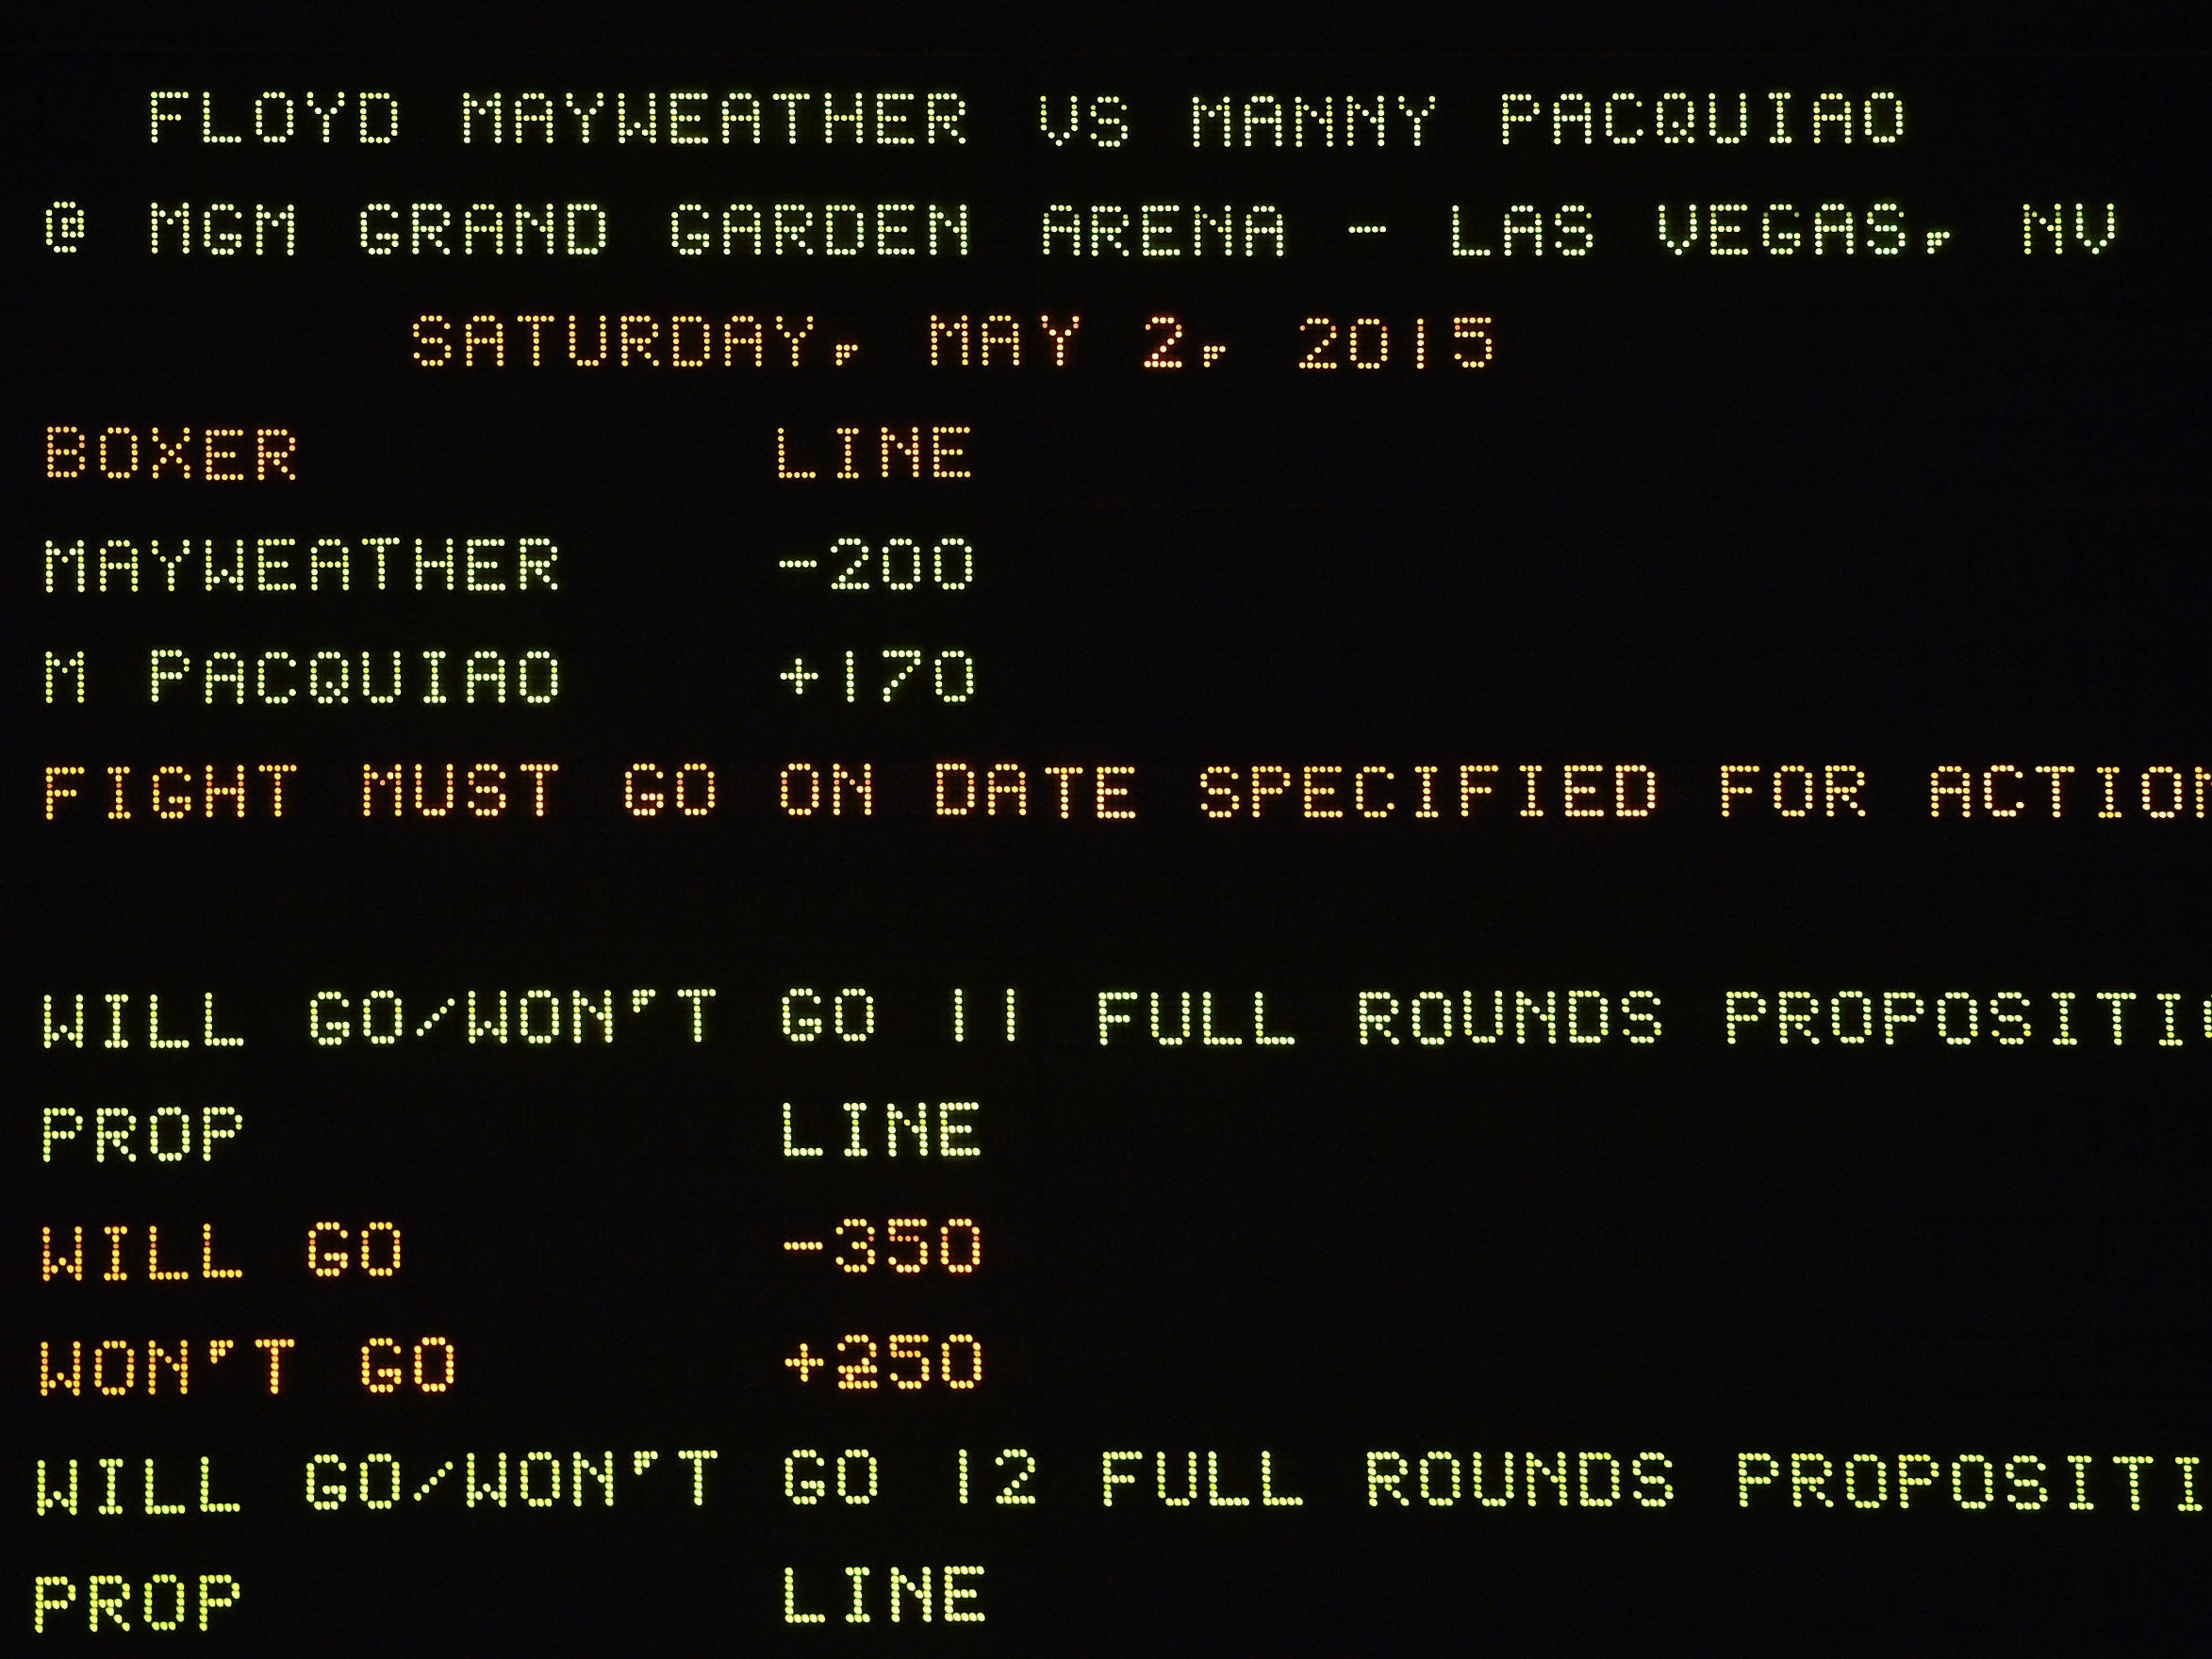 The fight is however unlikely to rival the amount bet on Mayweather v Pacquaio